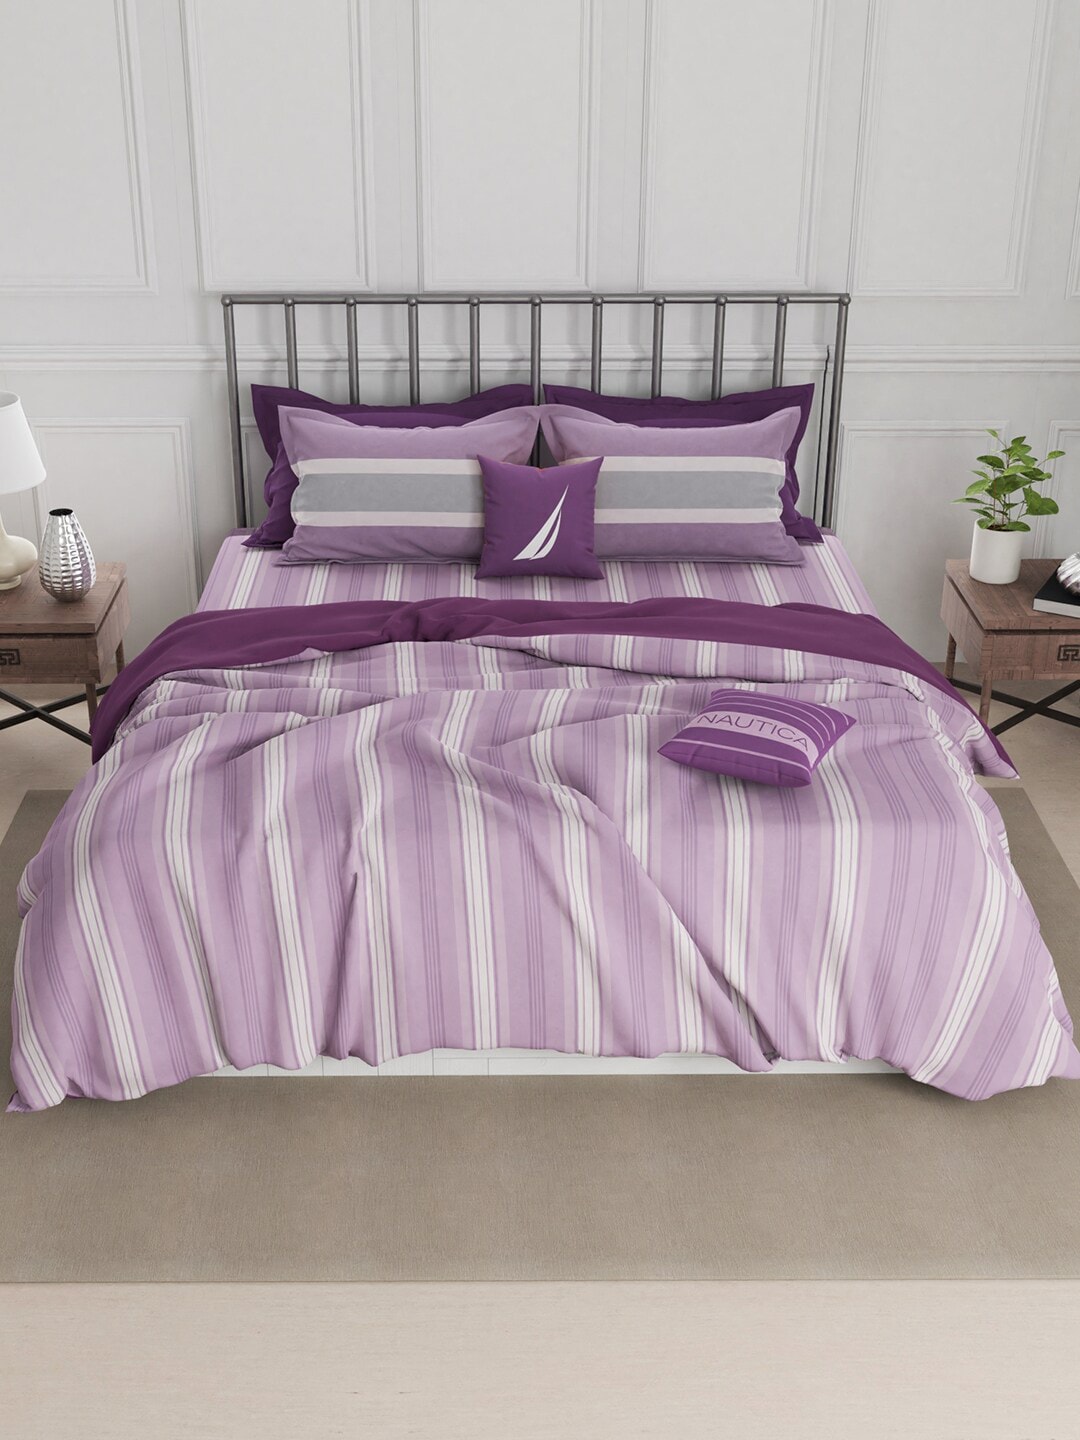 Nautica Purple Striped Cotton Double King Bedding Set With Comforter Price in India